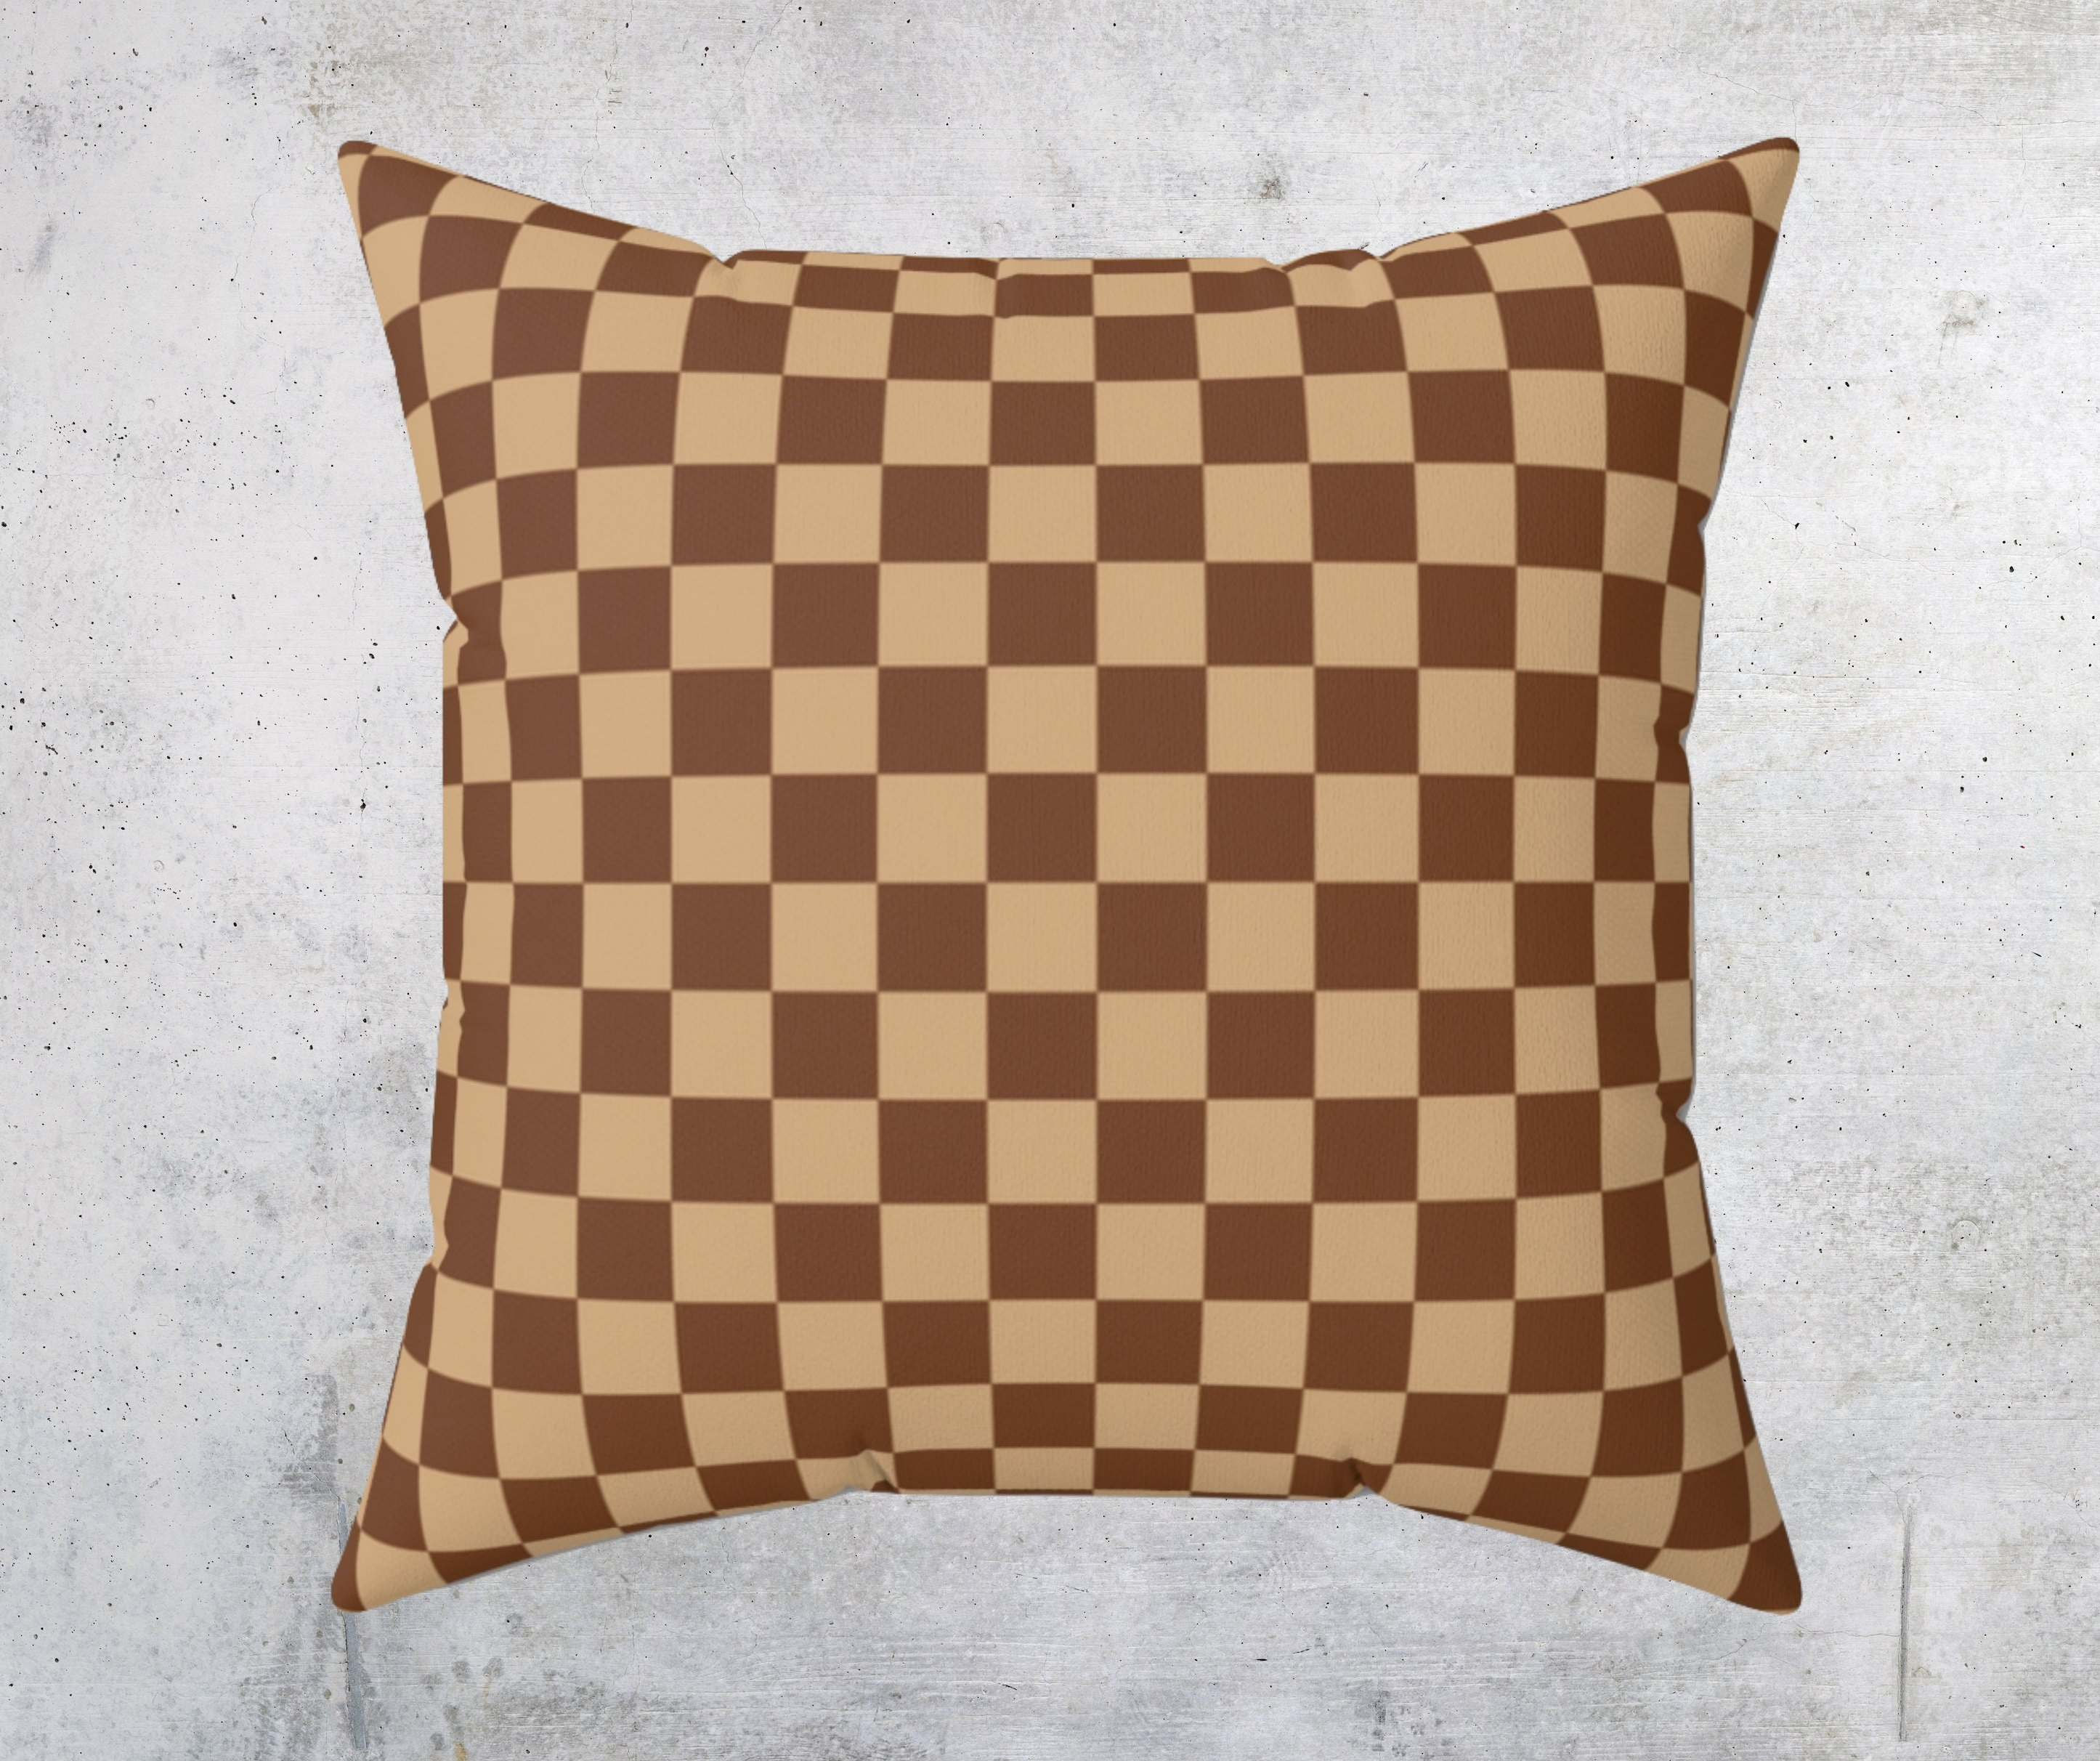 Louis Vuitton, Accents, Louis Vuitton Pillow Made From Dust Cover